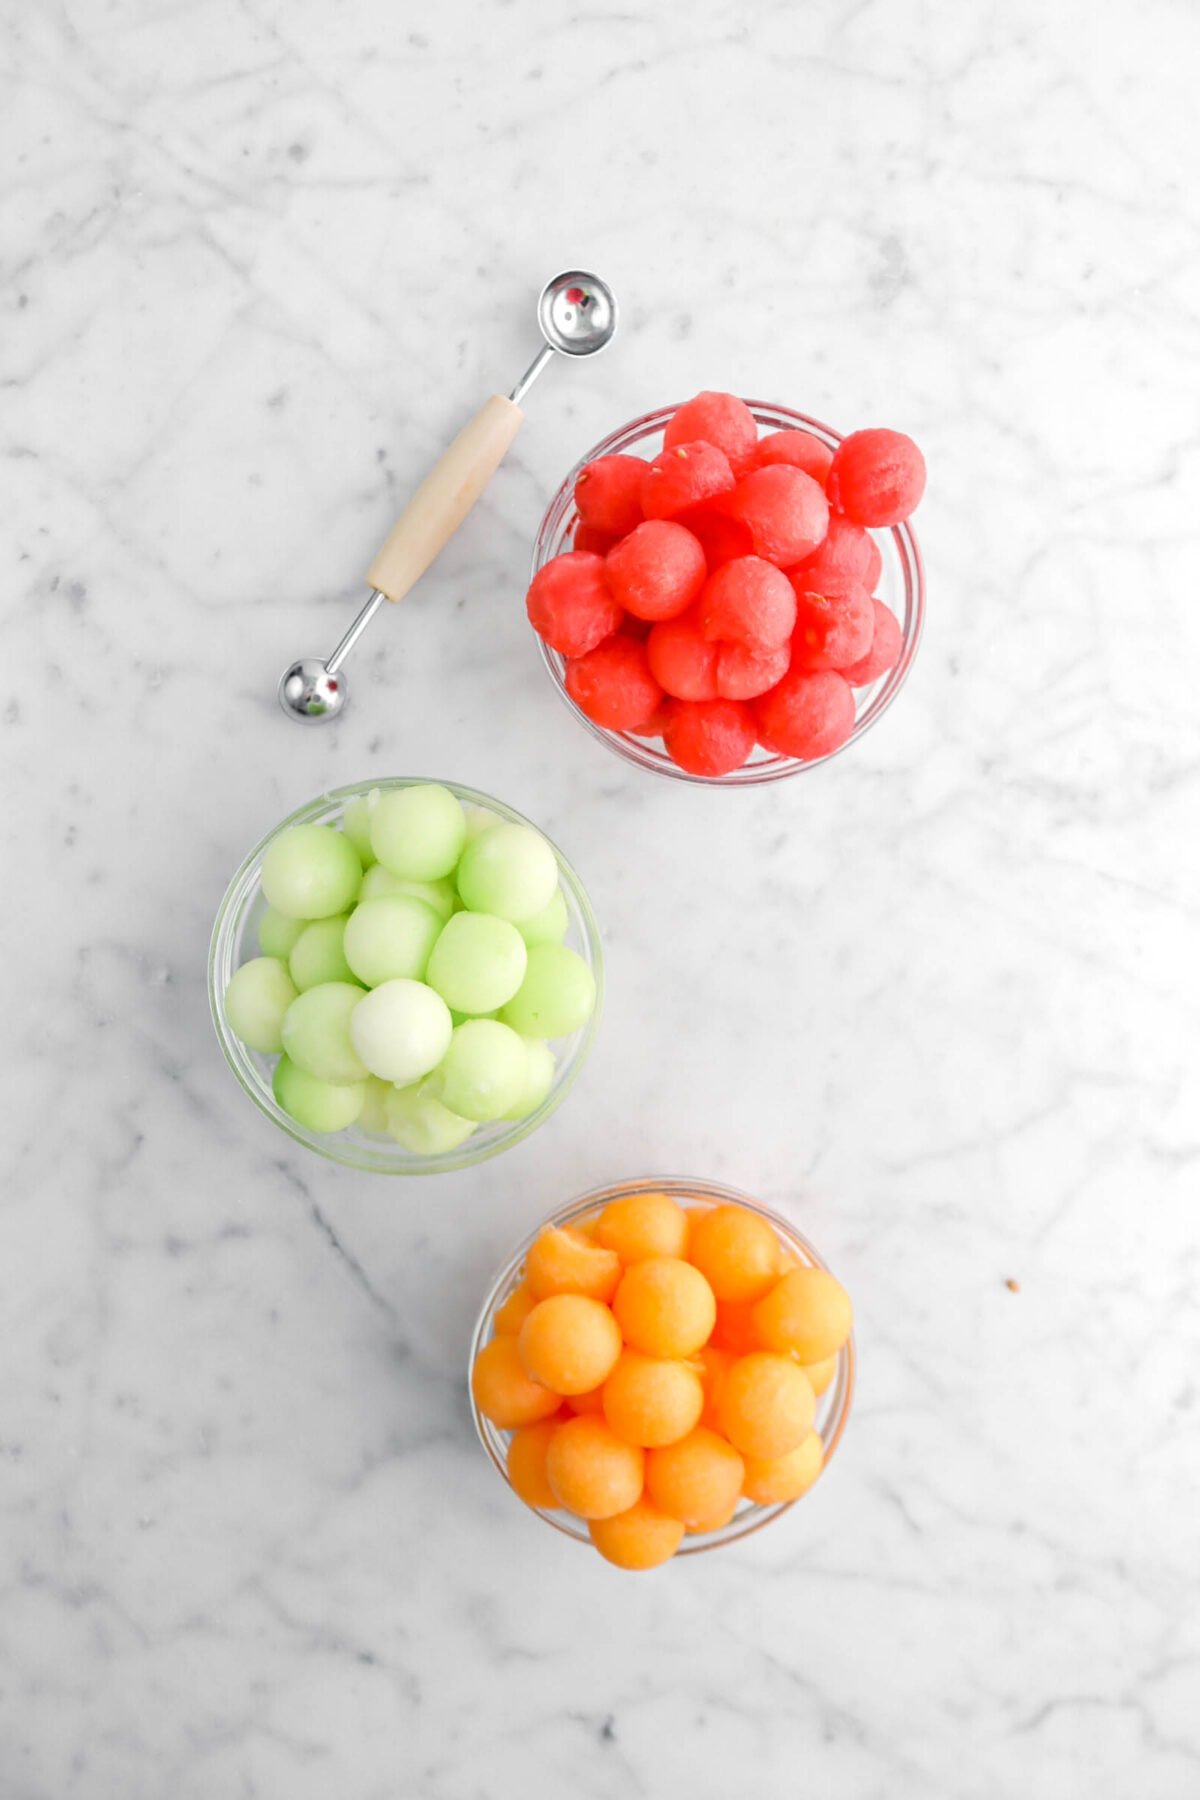 watermelon balls, honeydew balls, and cantaloupe balls in glass bowls on marble surface with melon baller beside